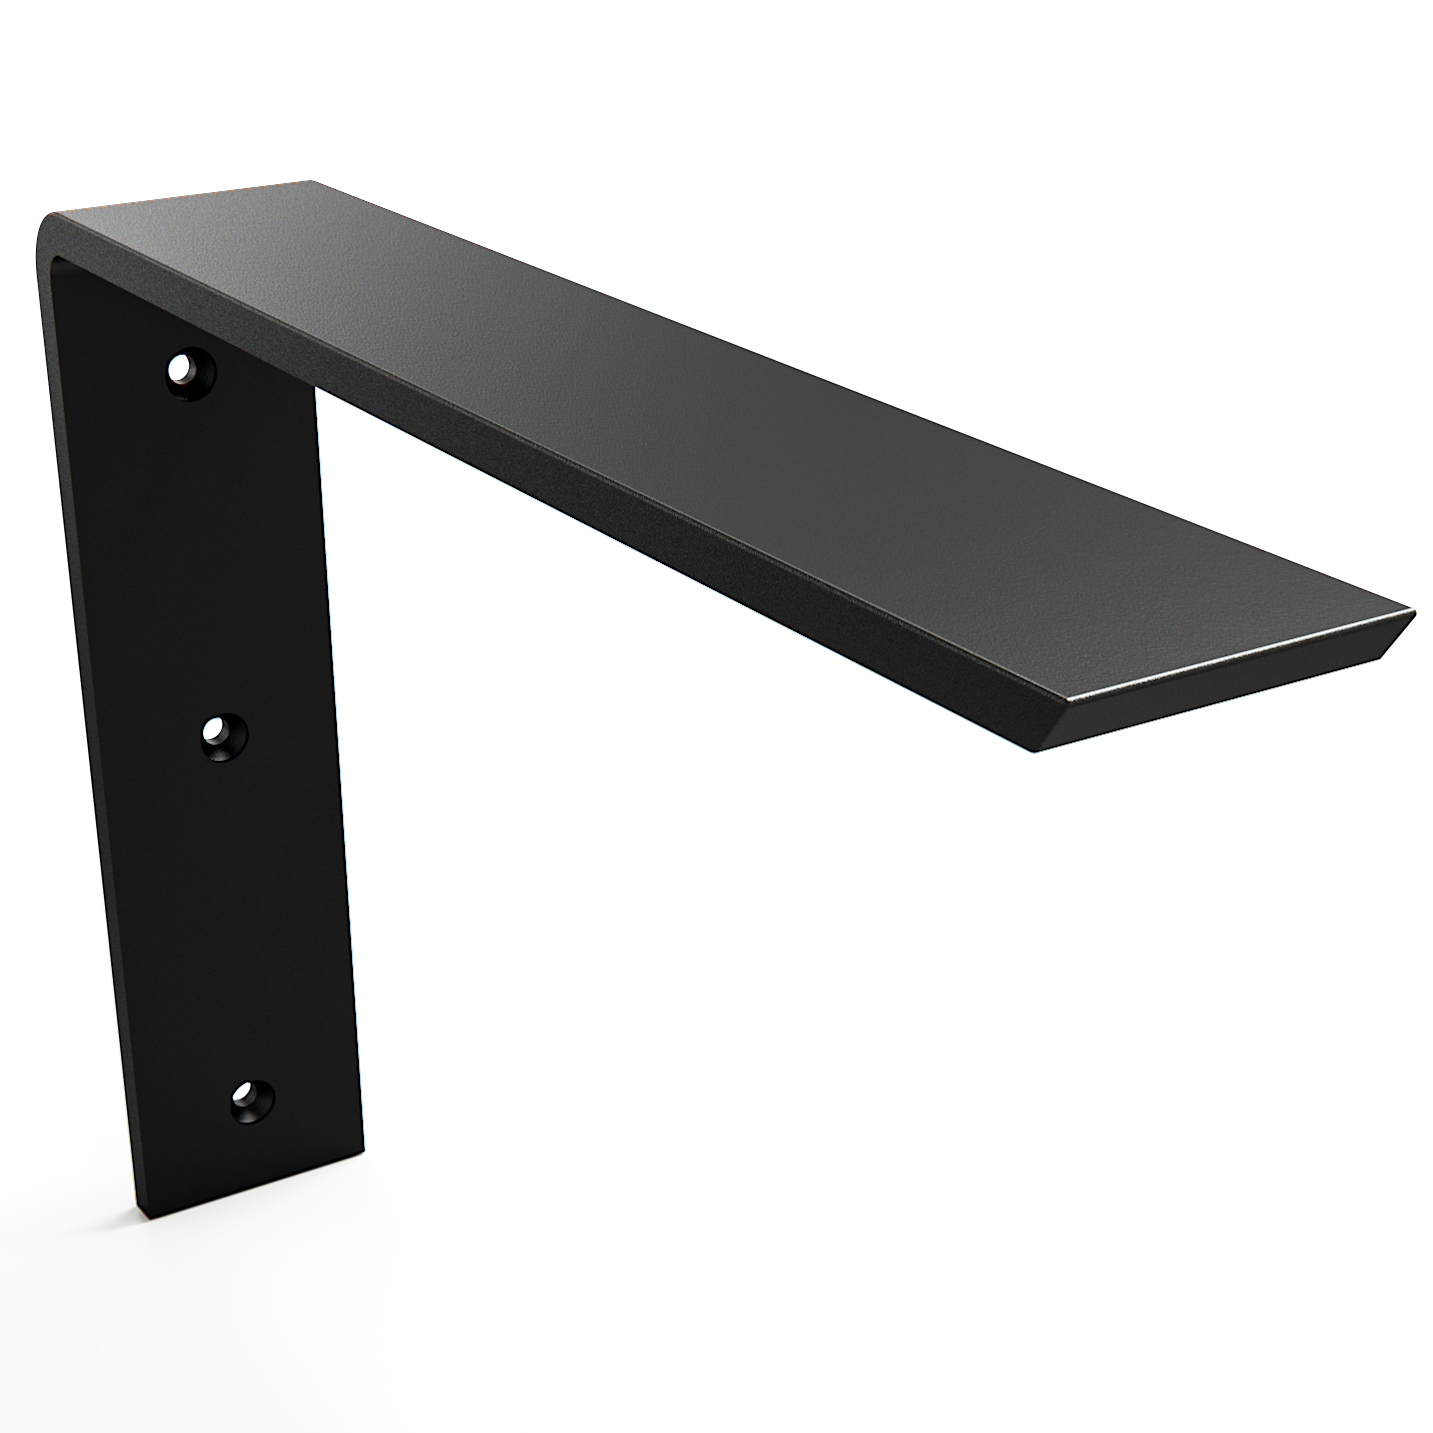 Standard Front Mount Countertop L Bracket  Granite Countertop Support -  IronSupports